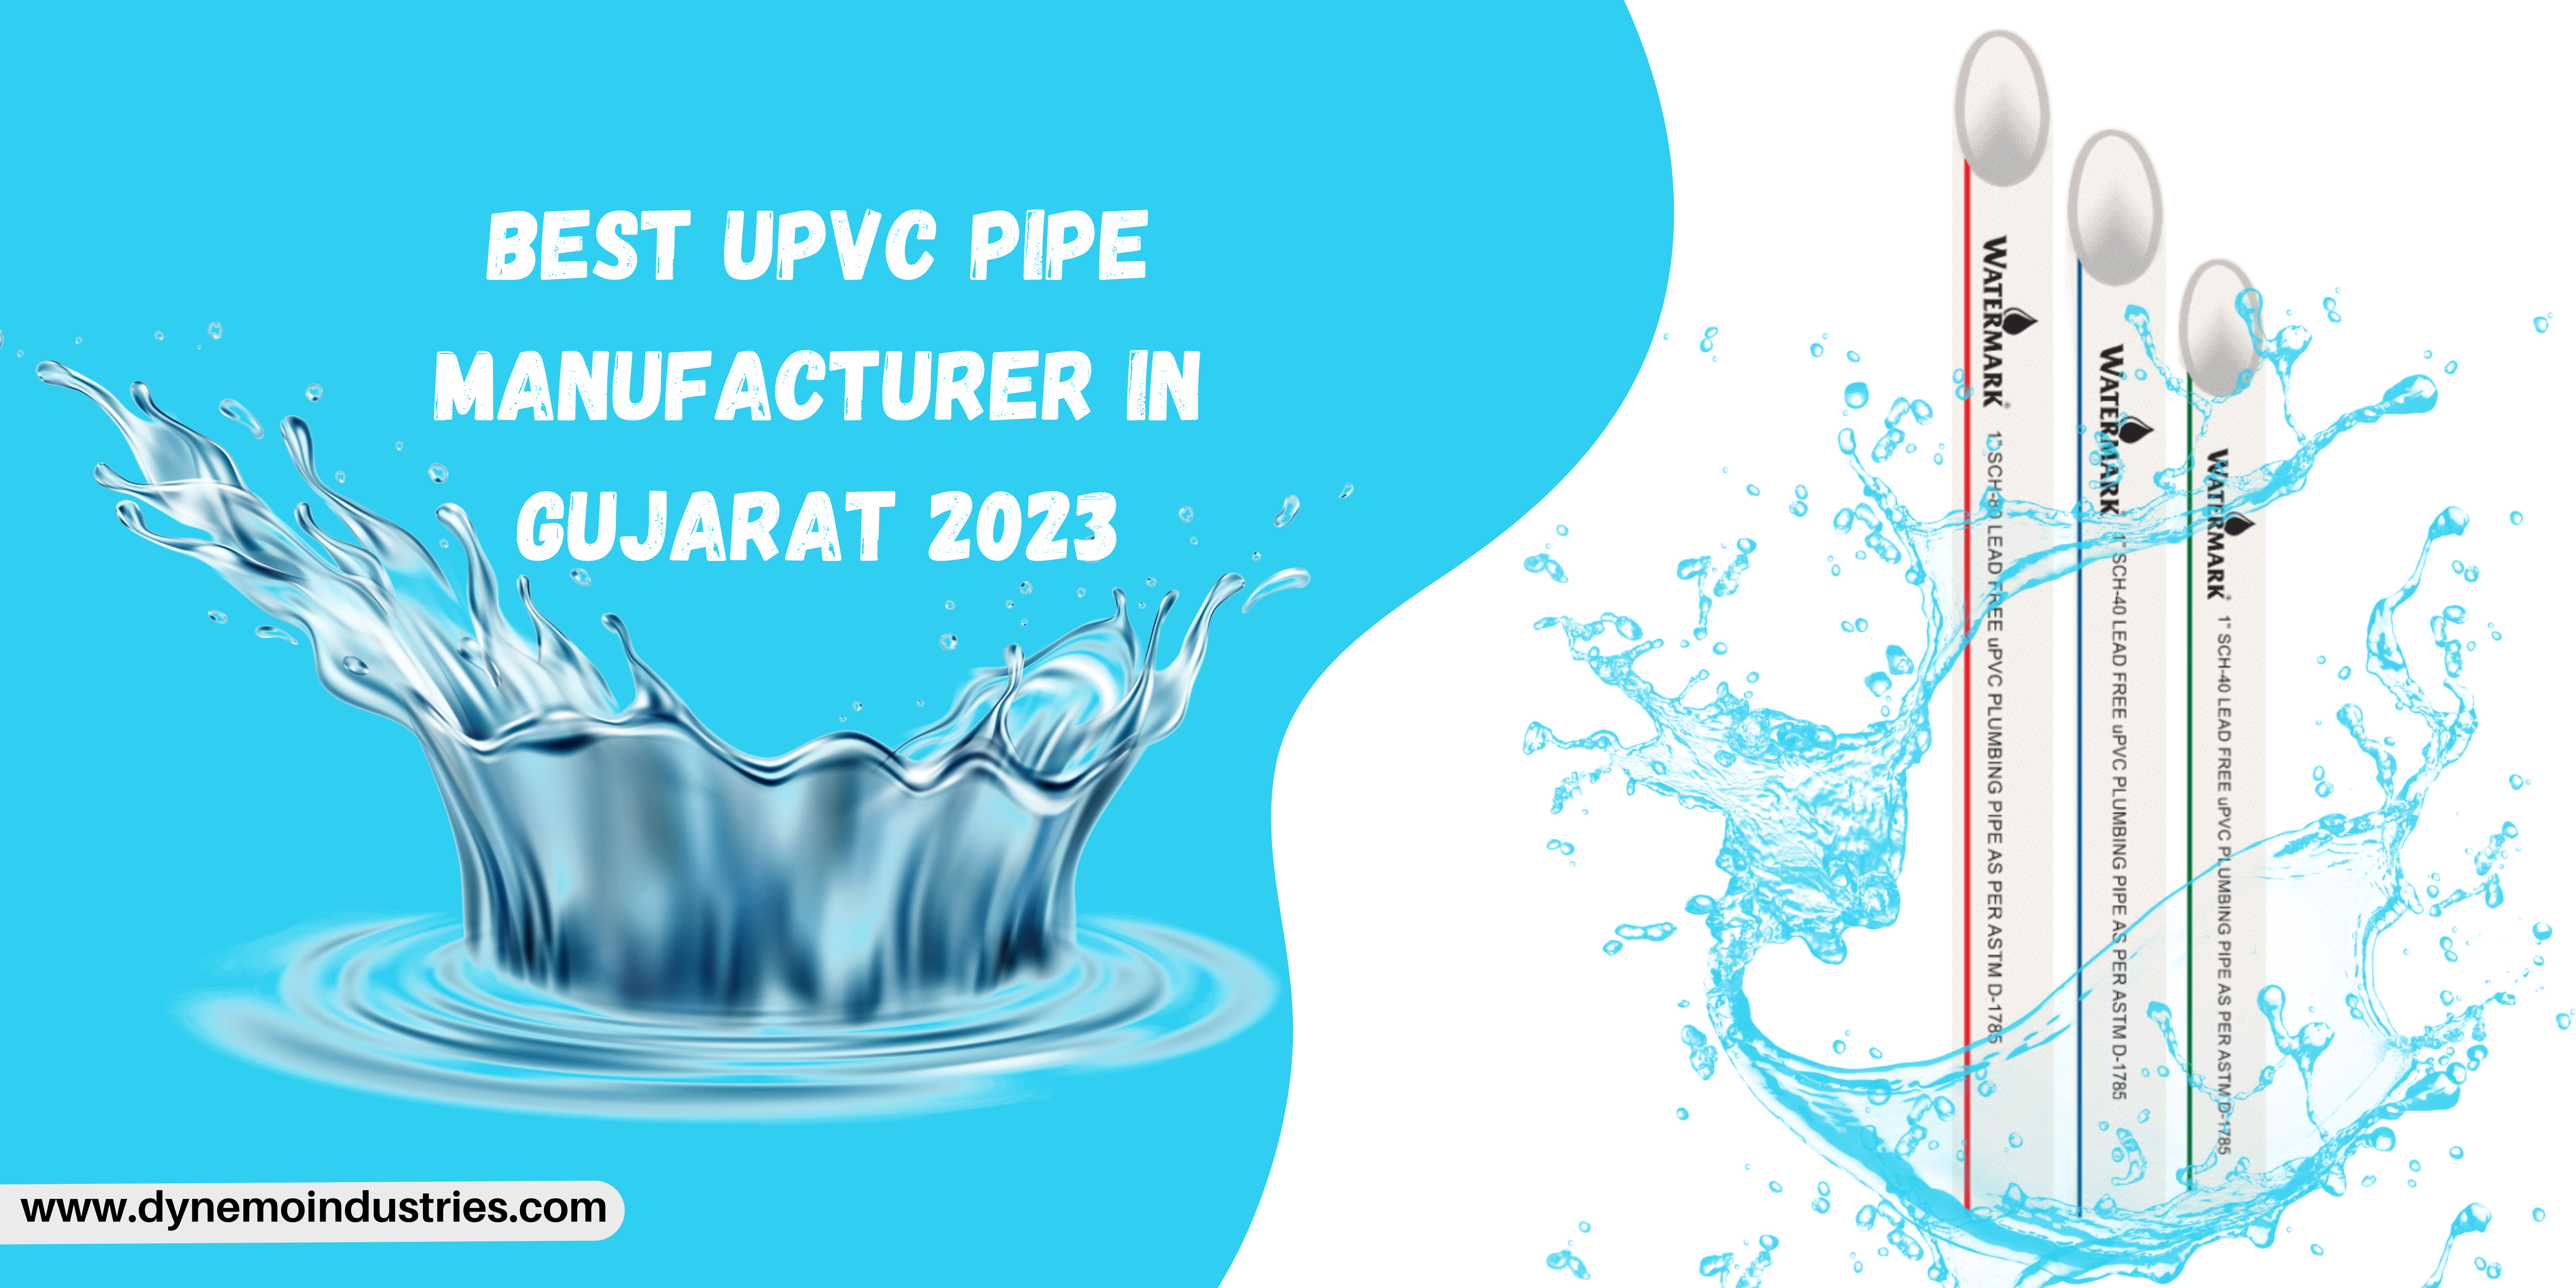 Why Dynemo is the best UPVC Pipe Manufacturer in Gujarat? This 2023.